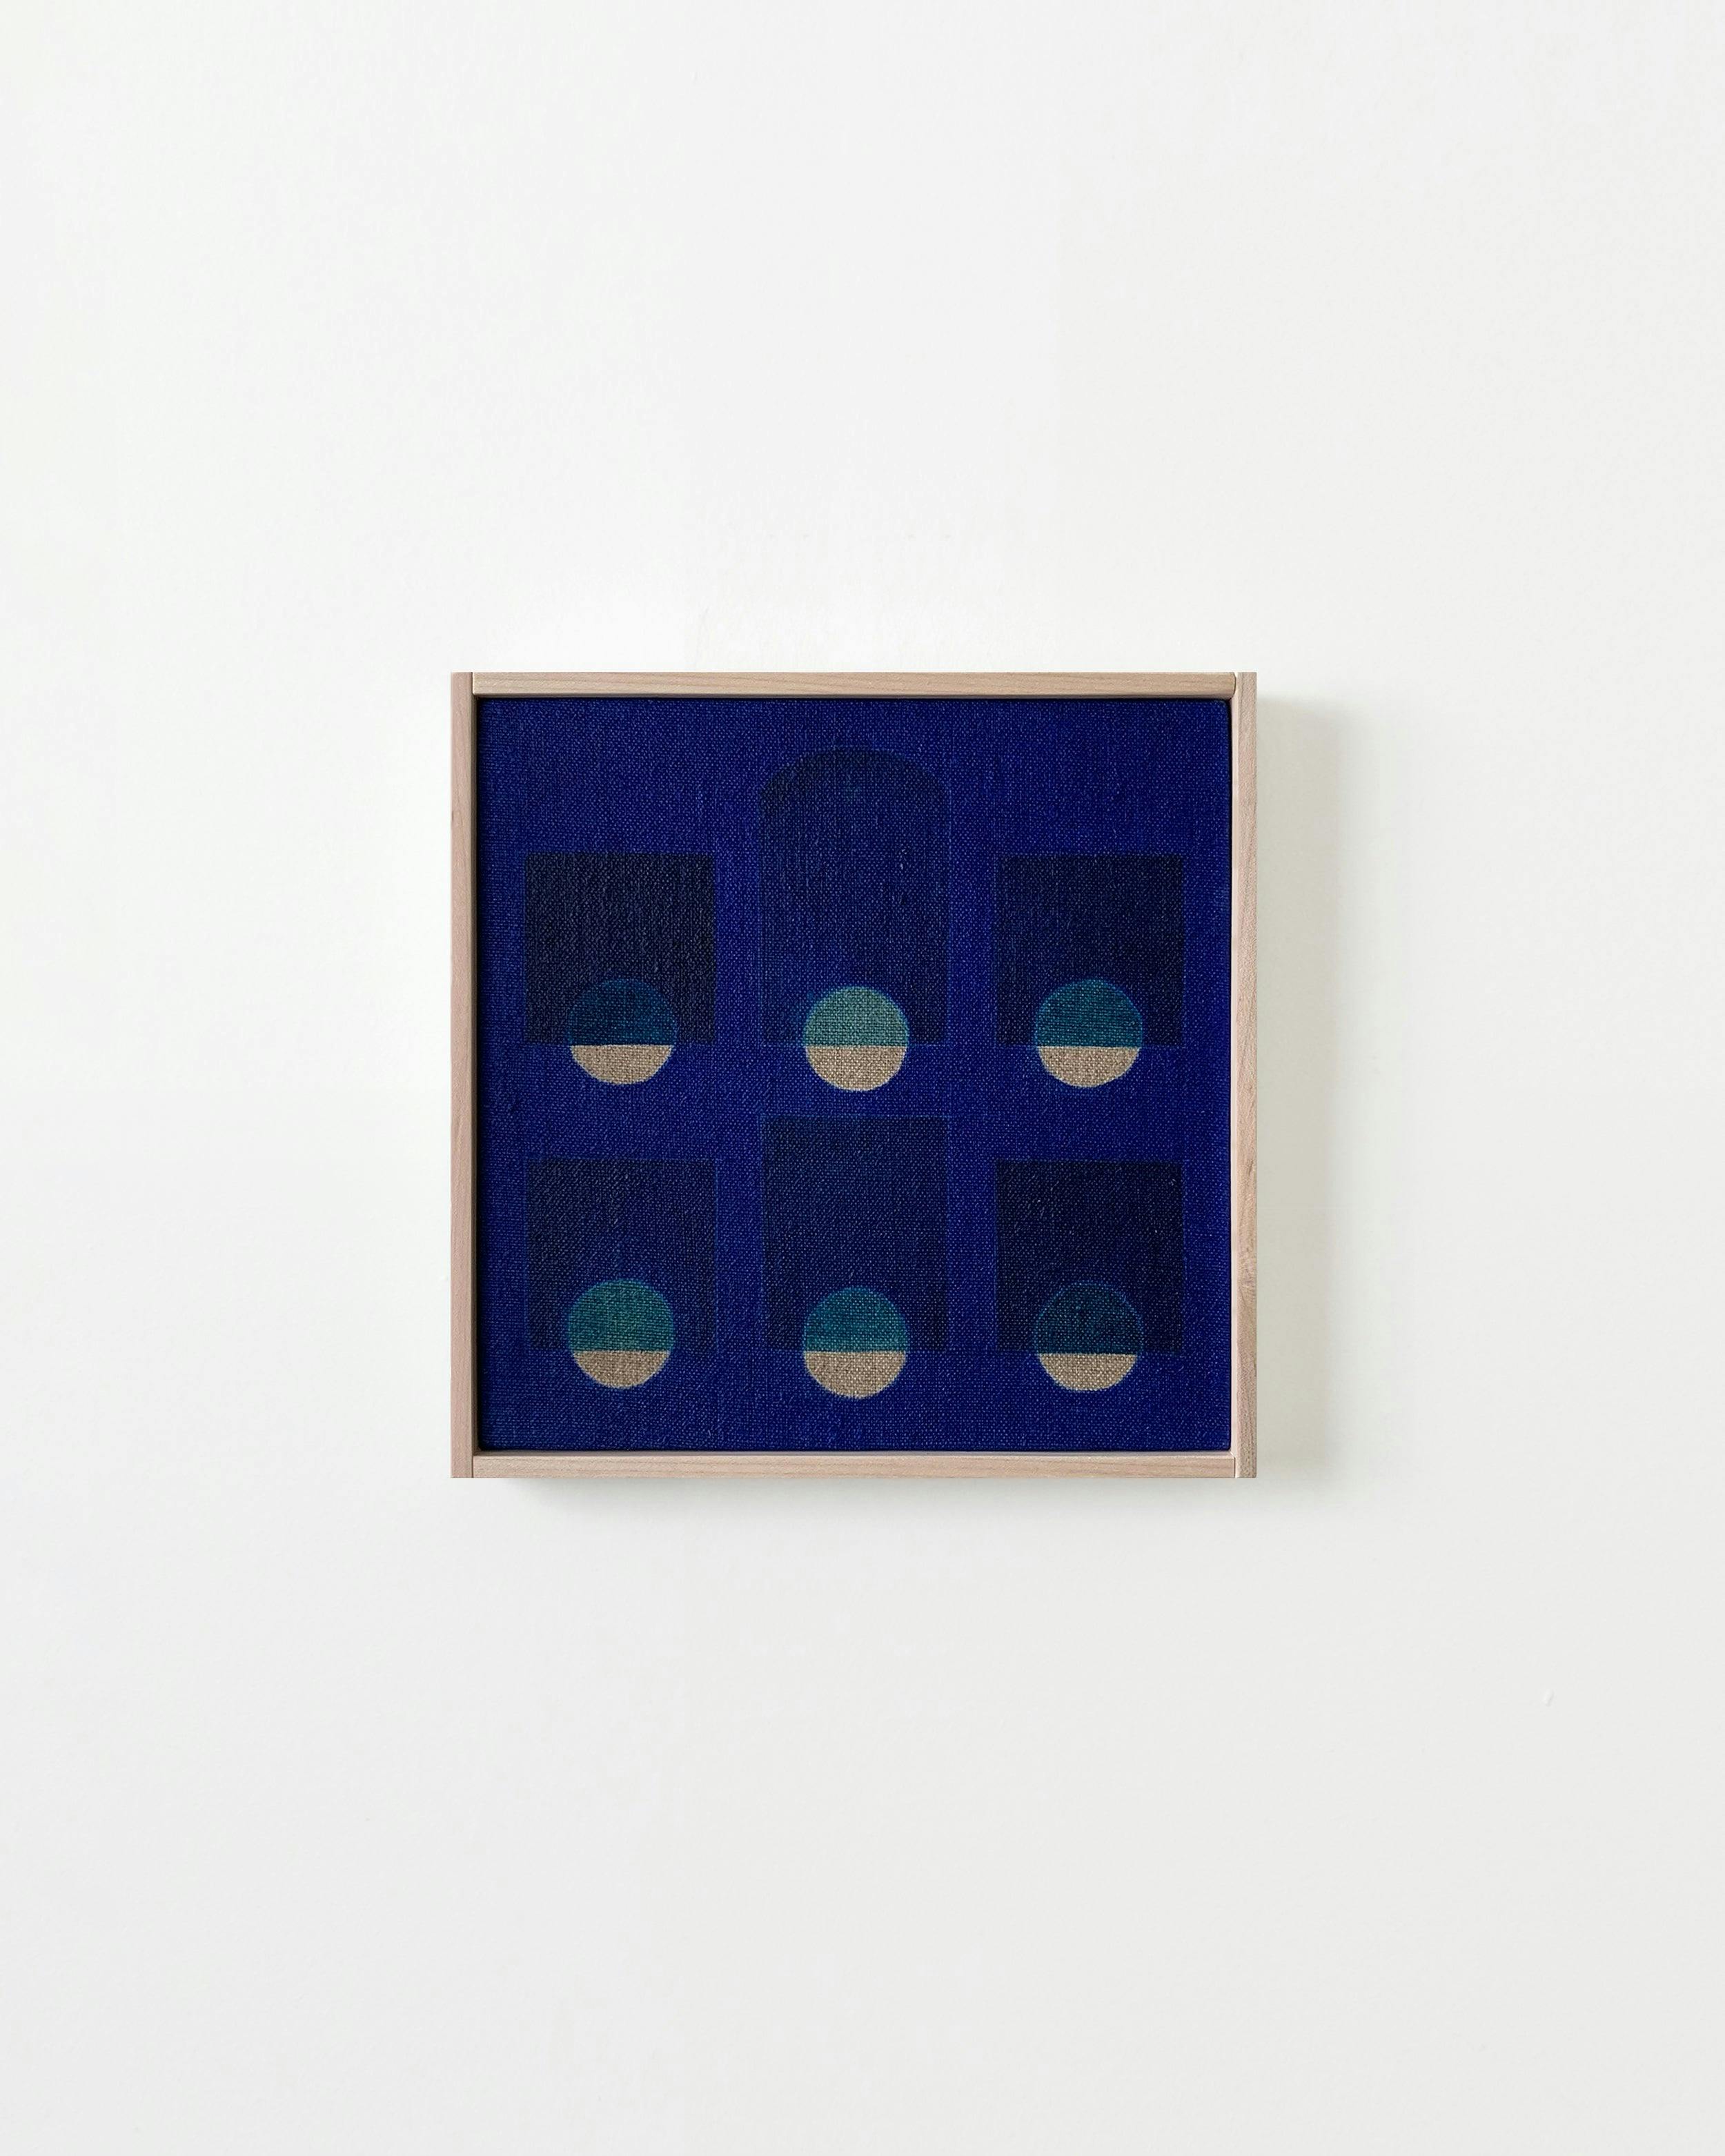 Painting by Carla Weeks titled "Grid Study in French Ultramarine 2".